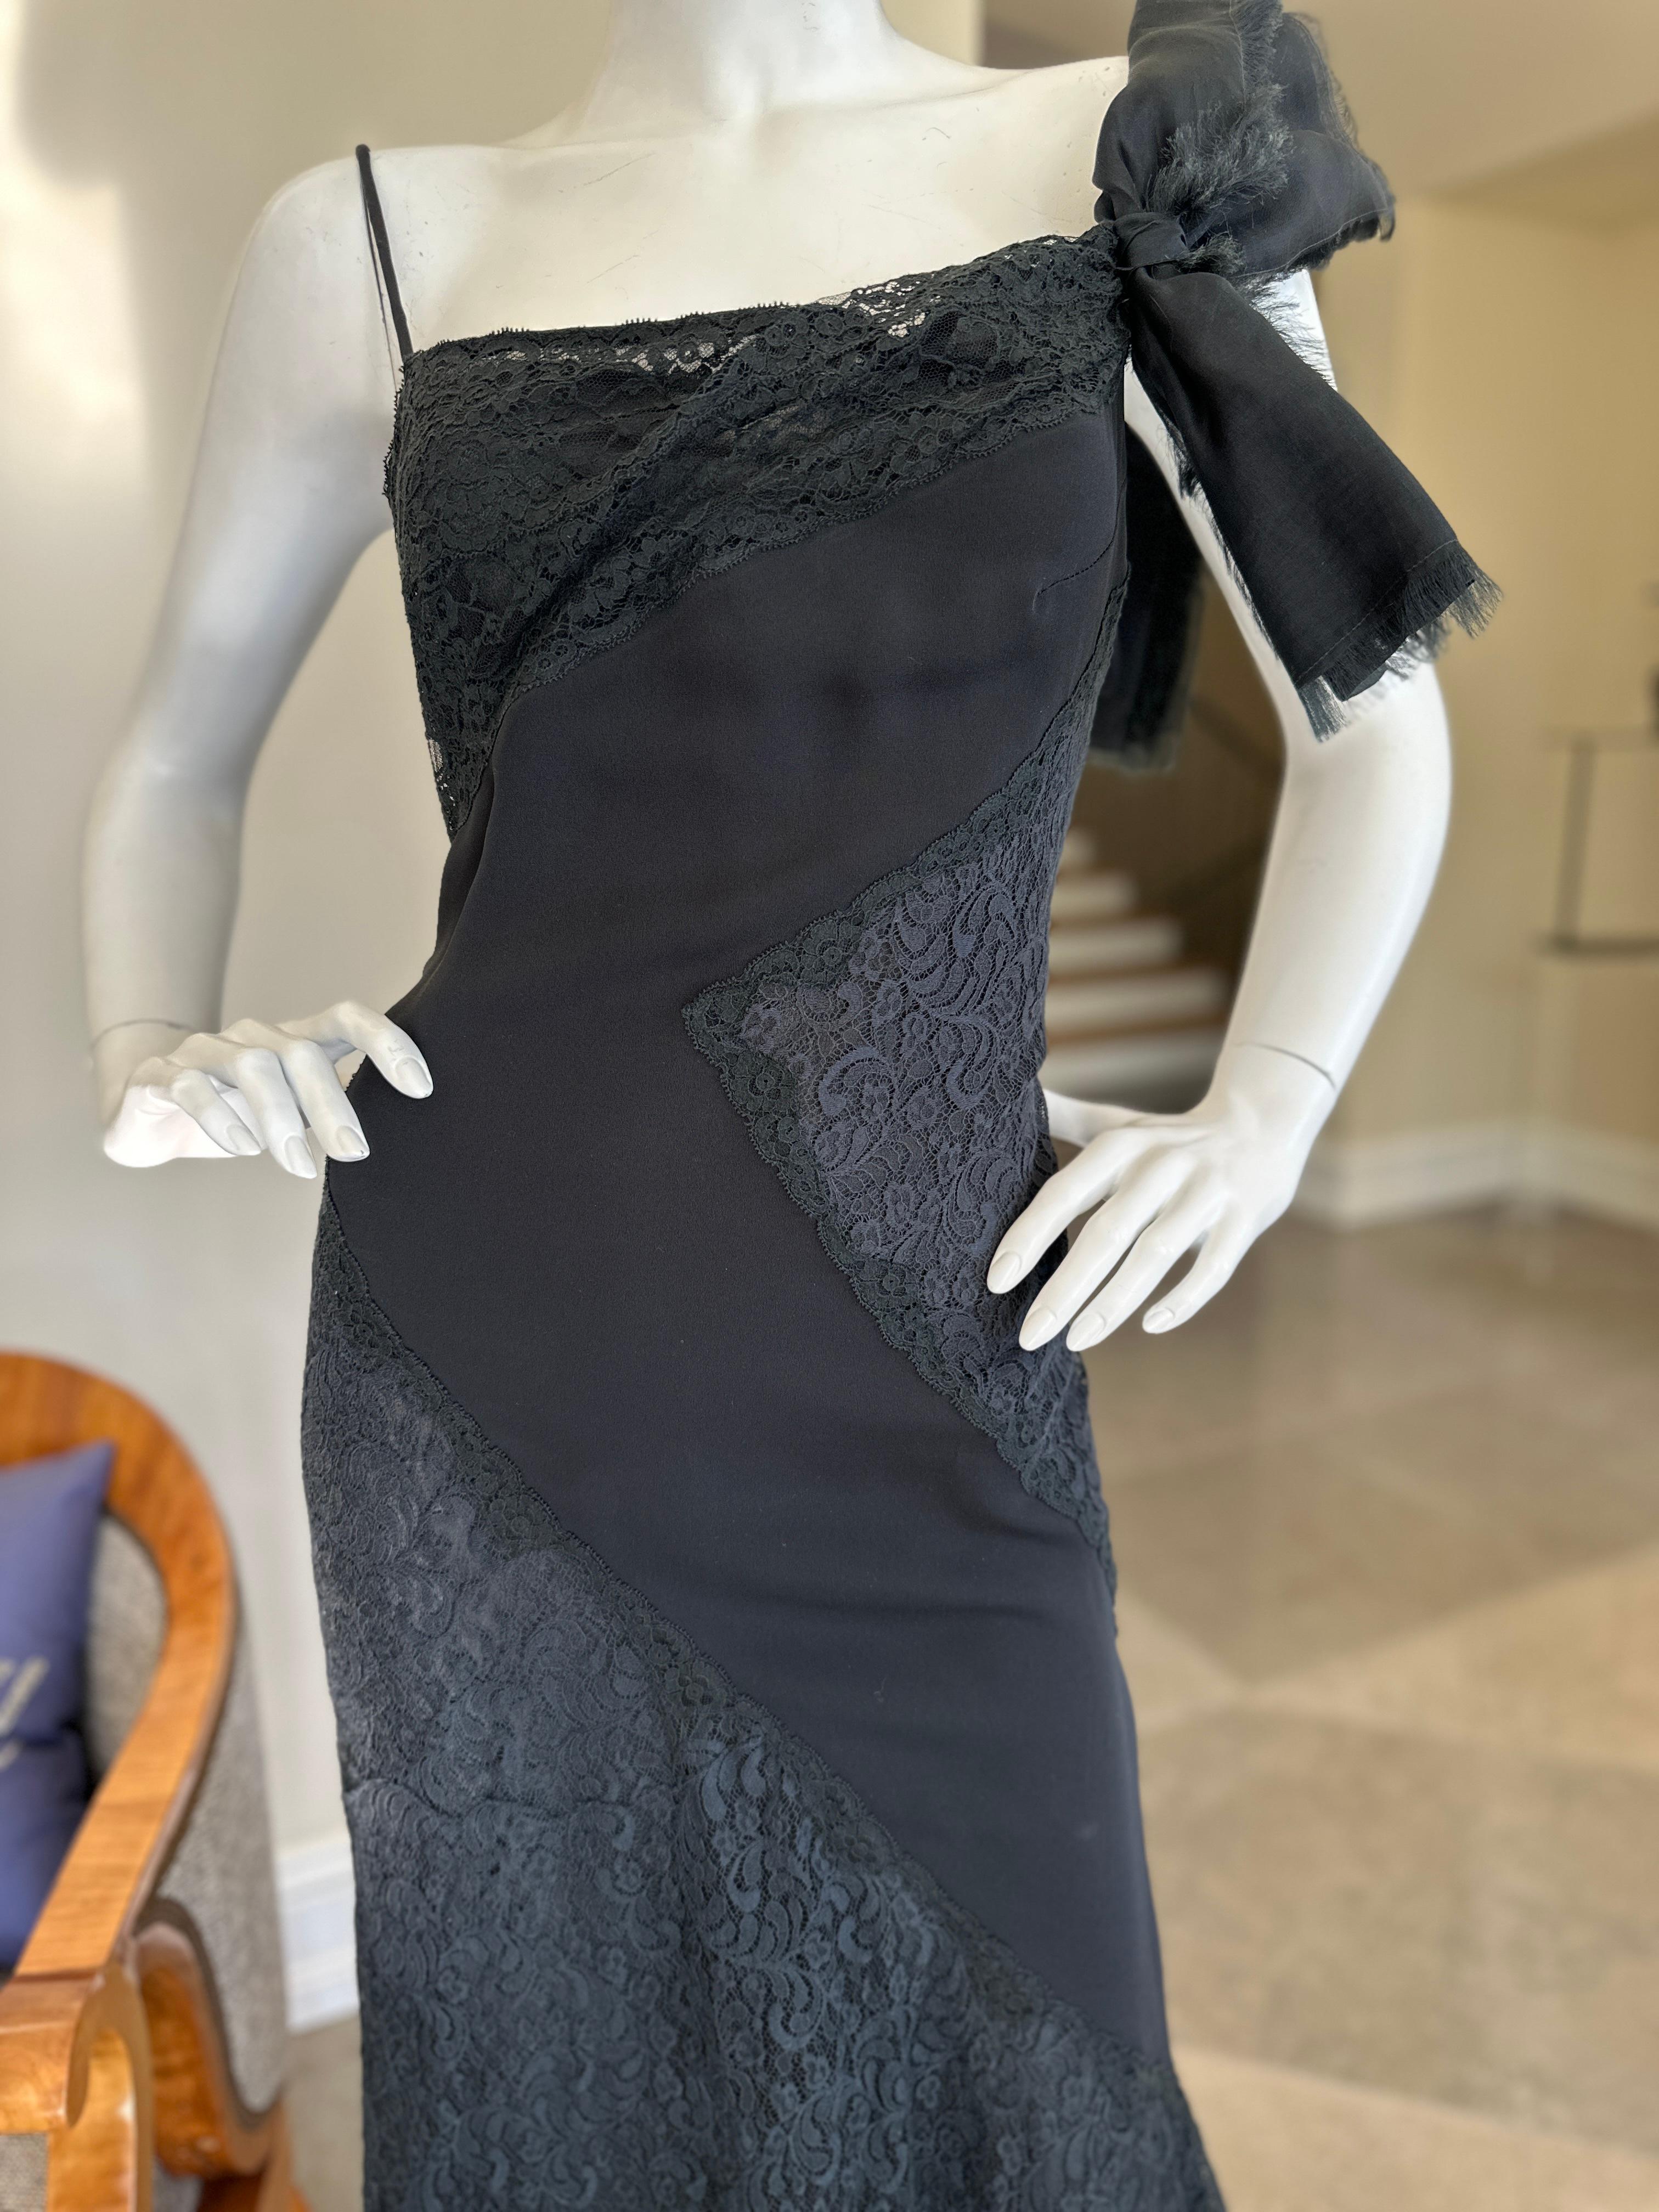 Valentino Vintage 1990's Sheer Lace Evening Dress with Scallop Edge Hem.
This is much prettier than the photographs show, and much more sheer.
Size 8
  Bust 38